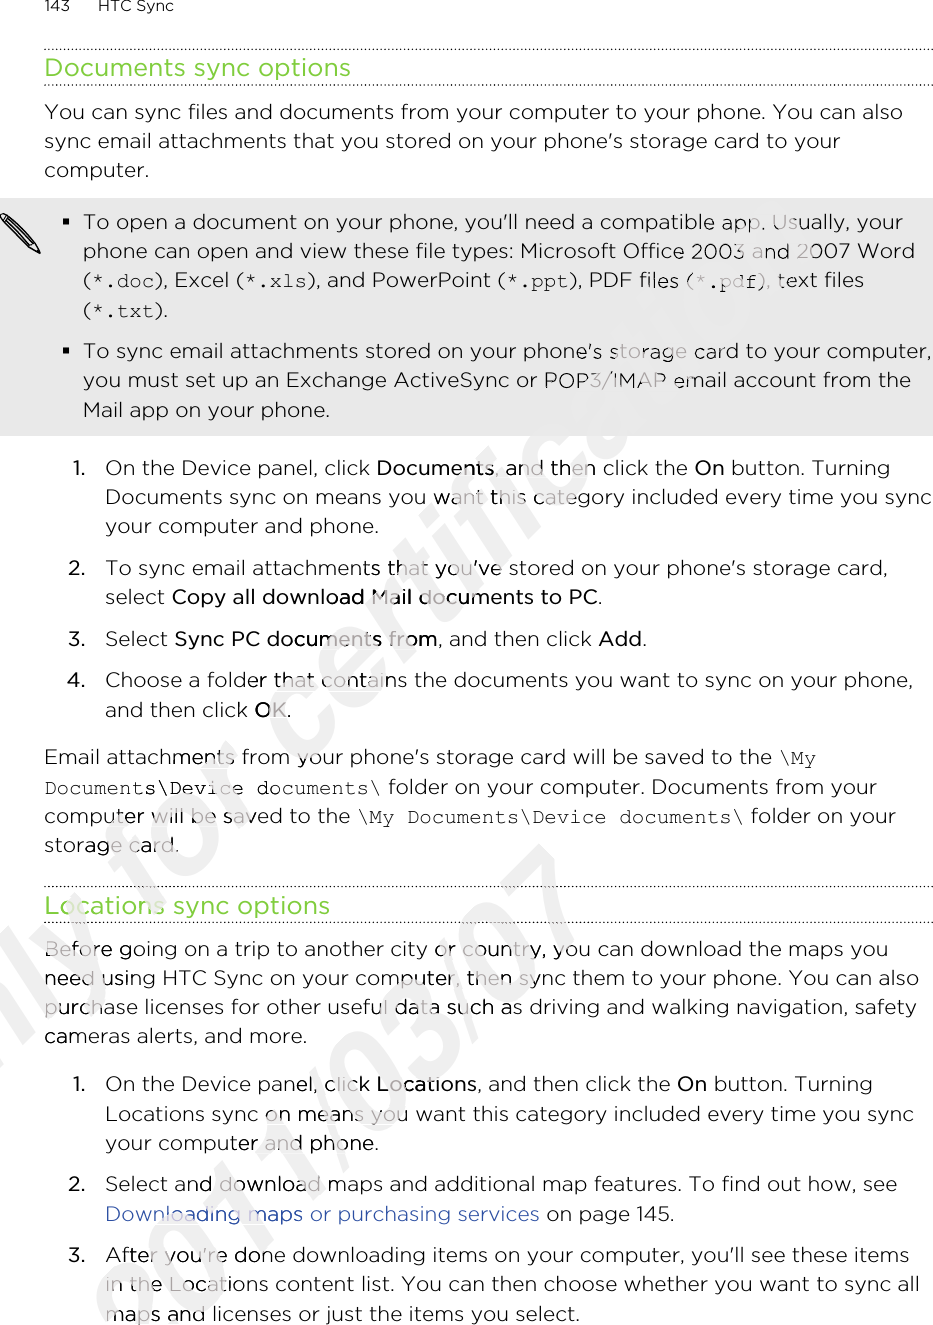 Documents sync optionsYou can sync files and documents from your computer to your phone. You can alsosync email attachments that you stored on your phone&apos;s storage card to yourcomputer.§To open a document on your phone, you&apos;ll need a compatible app. Usually, yourphone can open and view these file types: Microsoft Office 2003 and 2007 Word(*.doc), Excel (*.xls), and PowerPoint (*.ppt), PDF files (*.pdf), text files(*.txt).§To sync email attachments stored on your phone&apos;s storage card to your computer,you must set up an Exchange ActiveSync or POP3/IMAP email account from theMail app on your phone.1. On the Device panel, click Documents, and then click the On button. TurningDocuments sync on means you want this category included every time you syncyour computer and phone.2. To sync email attachments that you&apos;ve stored on your phone&apos;s storage card,select Copy all download Mail documents to PC. 3. Select Sync PC documents from, and then click Add.4. Choose a folder that contains the documents you want to sync on your phone,and then click OK.Email attachments from your phone&apos;s storage card will be saved to the \MyDocuments\Device documents\ folder on your computer. Documents from yourcomputer will be saved to the \My Documents\Device documents\ folder on yourstorage card.Locations sync optionsBefore going on a trip to another city or country, you can download the maps youneed using HTC Sync on your computer, then sync them to your phone. You can alsopurchase licenses for other useful data such as driving and walking navigation, safetycameras alerts, and more.1. On the Device panel, click Locations, and then click the On button. TurningLocations sync on means you want this category included every time you syncyour computer and phone.2. Select and download maps and additional map features. To find out how, see Downloading maps or purchasing services on page 145.3. After you&apos;re done downloading items on your computer, you&apos;ll see these itemsin the Locations content list. You can then choose whether you want to sync allmaps and licenses or just the items you select.143 HTC SyncOnly Locations sync optionsOnly Locations sync optionsOnly Only Before going on a trip to another city or country, you can download the maps youOnly Before going on a trip to another city or country, you can download the maps youneed using HTC Sync on your computer, then sync them to your phone. You can alsoOnly need using HTC Sync on your computer, then sync them to your phone. You can alsopurchase licenses for other useful data such as driving and walking navigation, safetyOnly purchase licenses for other useful data such as driving and walking navigation, safetycameras alerts, and more.Only cameras alerts, and more.for Email attachments from your phone&apos;s storage card will be saved to the for Email attachments from your phone&apos;s storage card will be saved to the Documents\Device documents\for Documents\Device documents\computer will be saved to the for computer will be saved to the storage card.for storage card.Locations sync optionsfor Locations sync optionsfor certification certification To open a document on your phone, you&apos;ll need a compatible app. Usually, yourcertification To open a document on your phone, you&apos;ll need a compatible app. Usually, yourphone can open and view these file types: Microsoft Office 2003 and 2007 Wordcertification phone can open and view these file types: Microsoft Office 2003 and 2007 Word), PDF files (certification ), PDF files (*.pdfcertification *.pdf), text filescertification ), text filesTo sync email attachments stored on your phone&apos;s storage card to your computer,certification To sync email attachments stored on your phone&apos;s storage card to your computer,you must set up an Exchange ActiveSync or POP3/IMAP email account from thecertification you must set up an Exchange ActiveSync or POP3/IMAP email account from theDocumentscertification Documents, and then click the certification , and then click the Documents sync on means you want this category included every time you synccertification Documents sync on means you want this category included every time you syncTo sync email attachments that you&apos;ve stored on your phone&apos;s storage card,certification To sync email attachments that you&apos;ve stored on your phone&apos;s storage card,Copy all download Mail documents to PCcertification Copy all download Mail documents to PCSync PC documents fromcertification Sync PC documents from, and then click certification , and then click Choose a folder that contains the documents you want to sync on your phone,certification Choose a folder that contains the documents you want to sync on your phone,and then click certification and then click OKcertification OK.certification .Email attachments from your phone&apos;s storage card will be saved to the certification Email attachments from your phone&apos;s storage card will be saved to the 2011/03/072011/03/072011/03/072011/03/07Before going on a trip to another city or country, you can download the maps you2011/03/07Before going on a trip to another city or country, you can download the maps youneed using HTC Sync on your computer, then sync them to your phone. You can also2011/03/07need using HTC Sync on your computer, then sync them to your phone. You can alsopurchase licenses for other useful data such as driving and walking navigation, safety2011/03/07purchase licenses for other useful data such as driving and walking navigation, safetyOn the Device panel, click 2011/03/07On the Device panel, click Locations2011/03/07LocationsLocations sync on means you want this category included every time you sync2011/03/07Locations sync on means you want this category included every time you syncyour computer and phone.2011/03/07your computer and phone.2011/03/07Select and download maps and additional map features. To find out how, see 2011/03/07Select and download maps and additional map features. To find out how, see Downloading maps or purchasing services 2011/03/07Downloading maps or purchasing services After you&apos;re done downloading items on your computer, you&apos;ll see these items2011/03/07After you&apos;re done downloading items on your computer, you&apos;ll see these itemsin the Locations content list. You can then choose whether you want to sync all2011/03/07in the Locations content list. You can then choose whether you want to sync allmaps and licenses or just the items you select.2011/03/07maps and licenses or just the items you select.